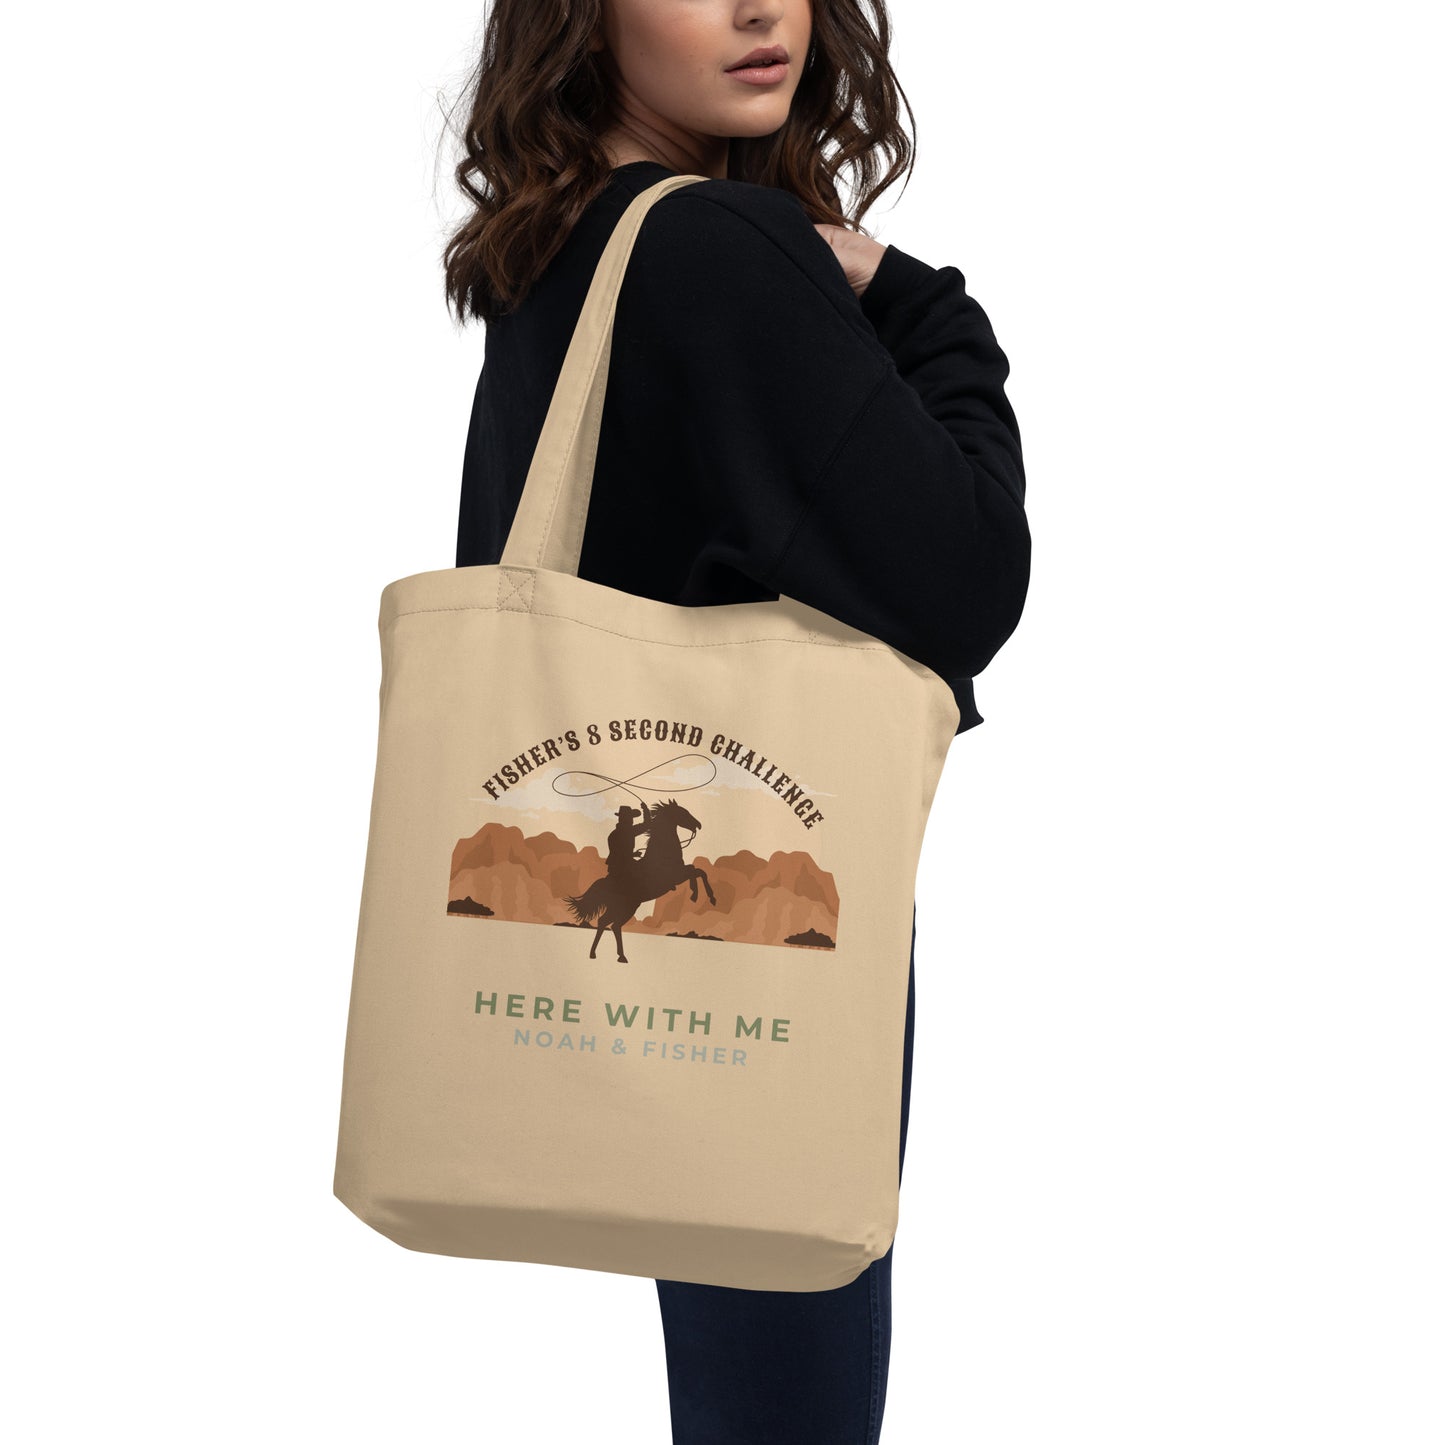 "Fisher's 8 Second Challenge" [Here With Me] Collector's Edition Eco Tote Bag